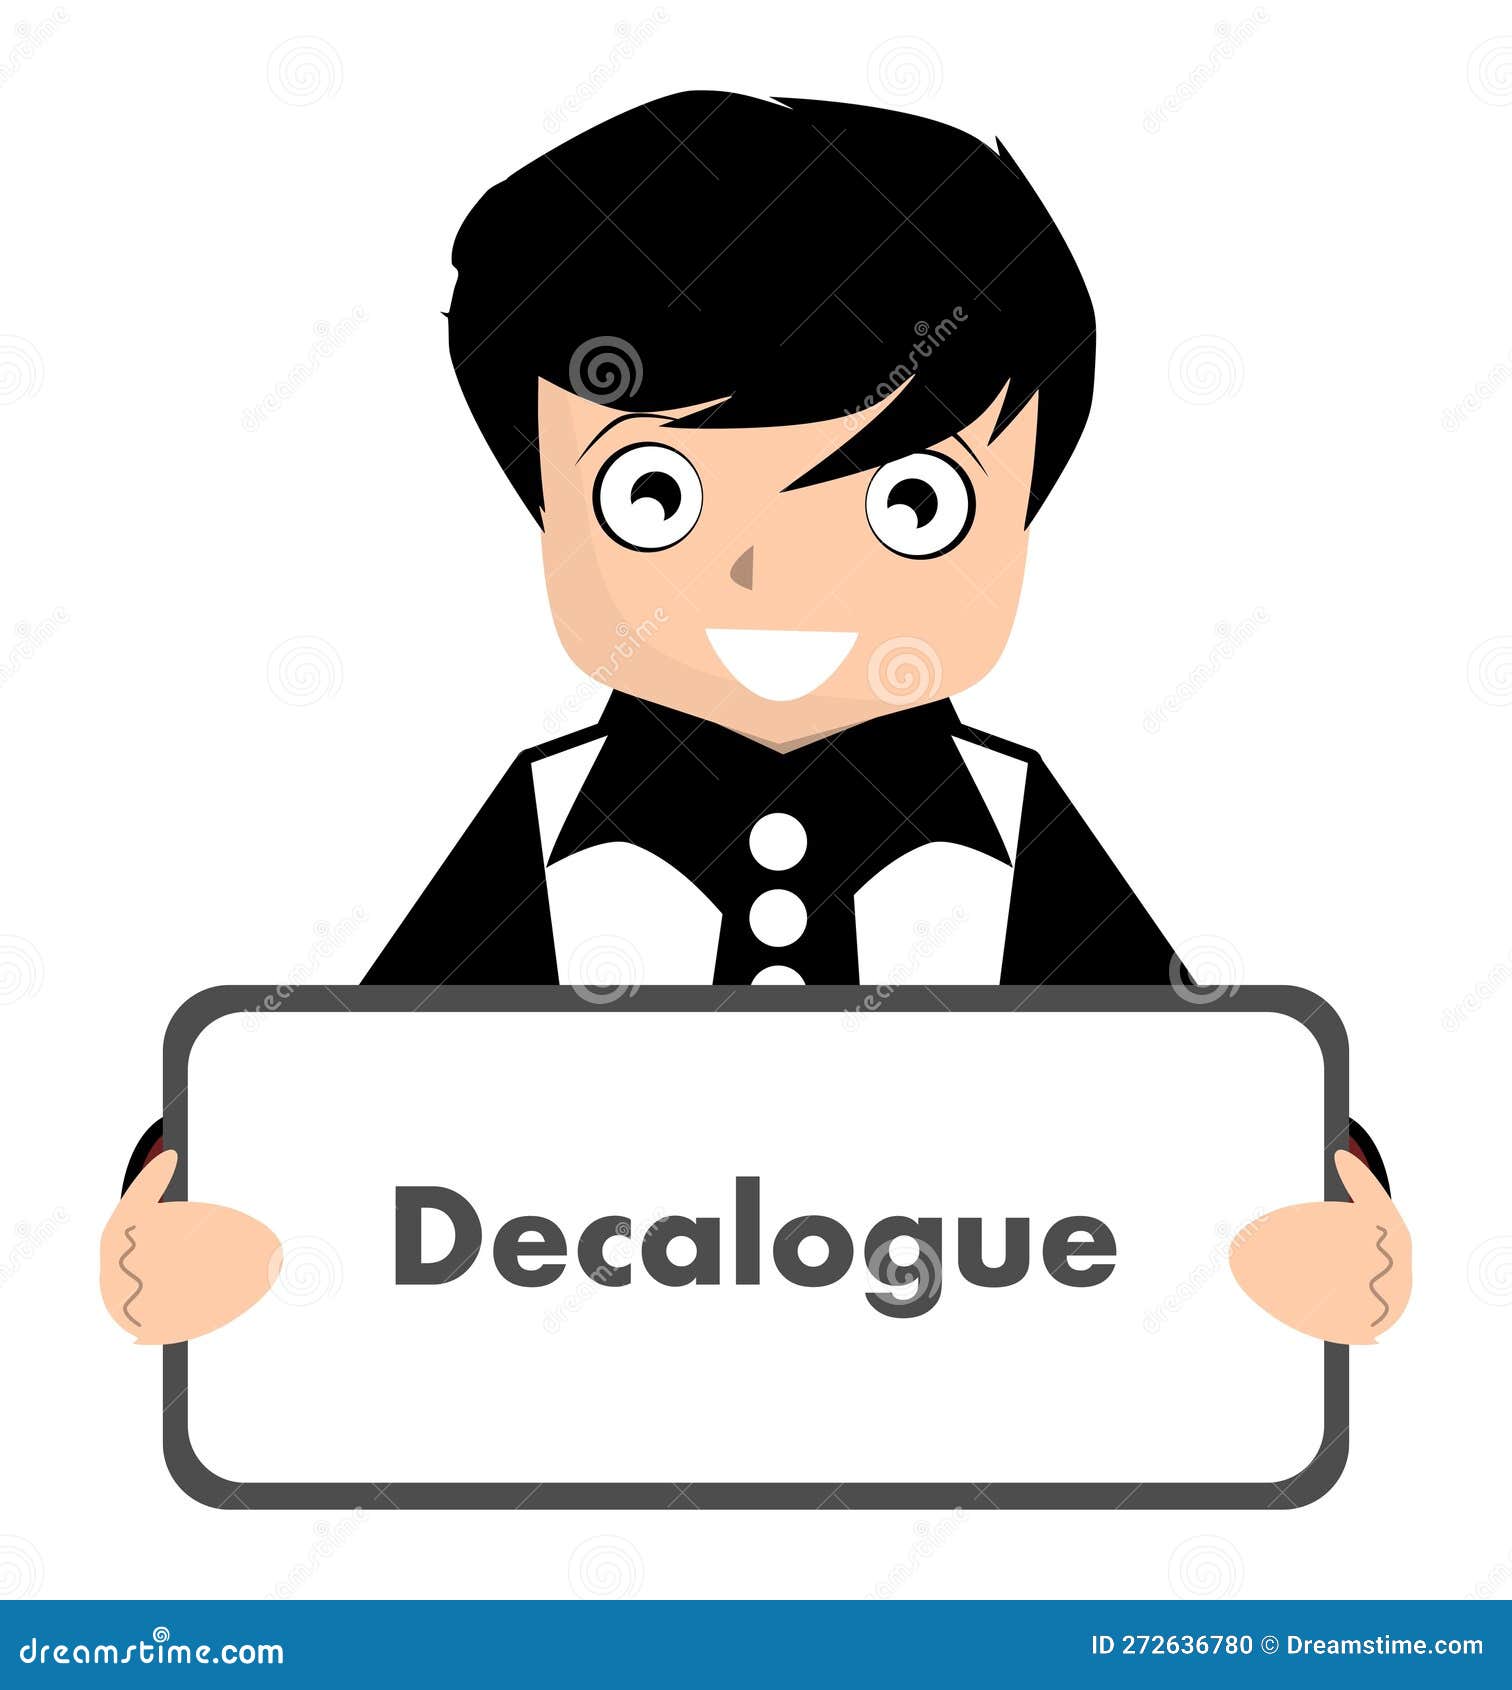 boy with decalogue sign,english, rules, .